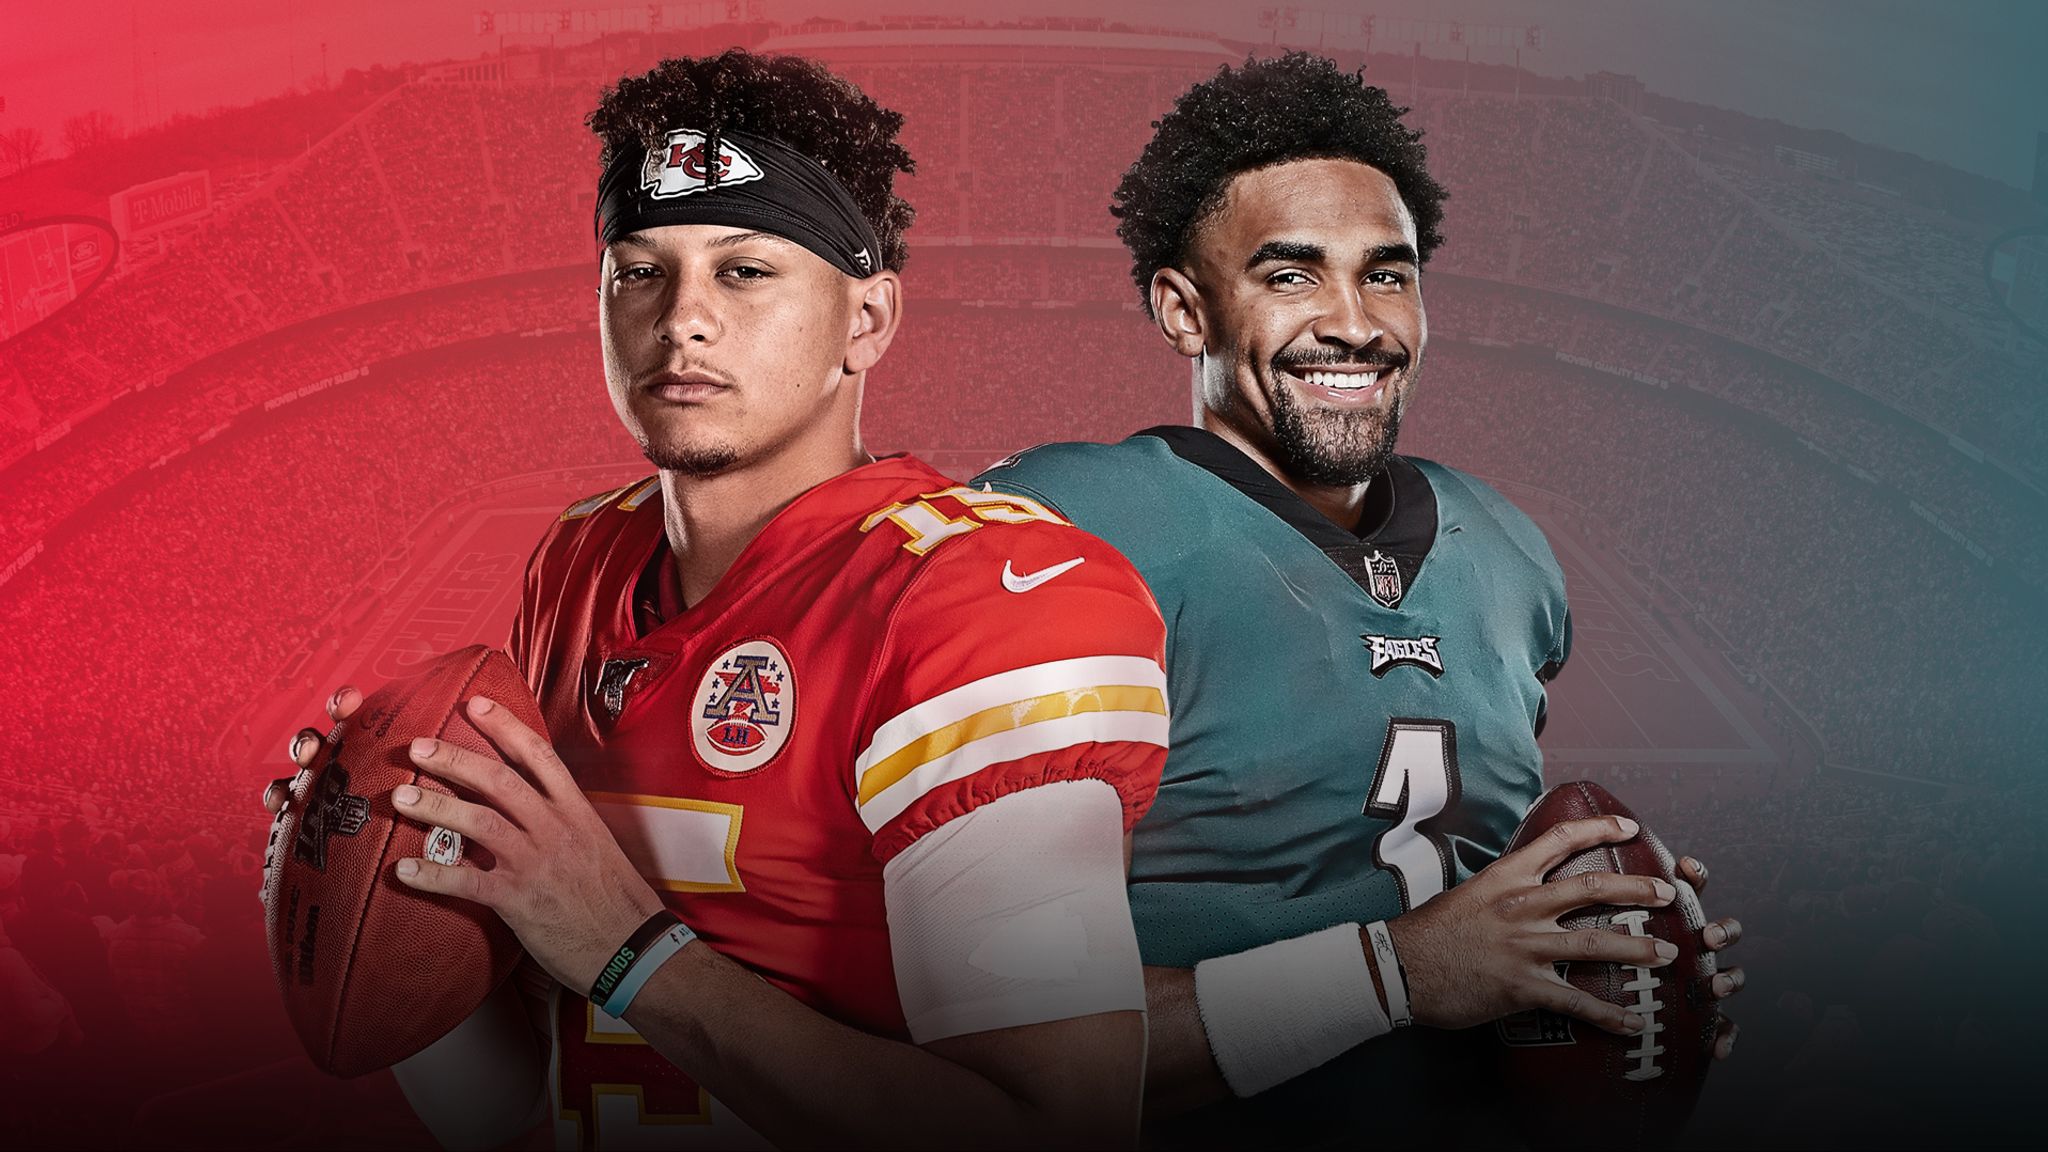 Who is playing Monday Night Football tonight? Teams, start time and channel  for Giants vs Chiefs